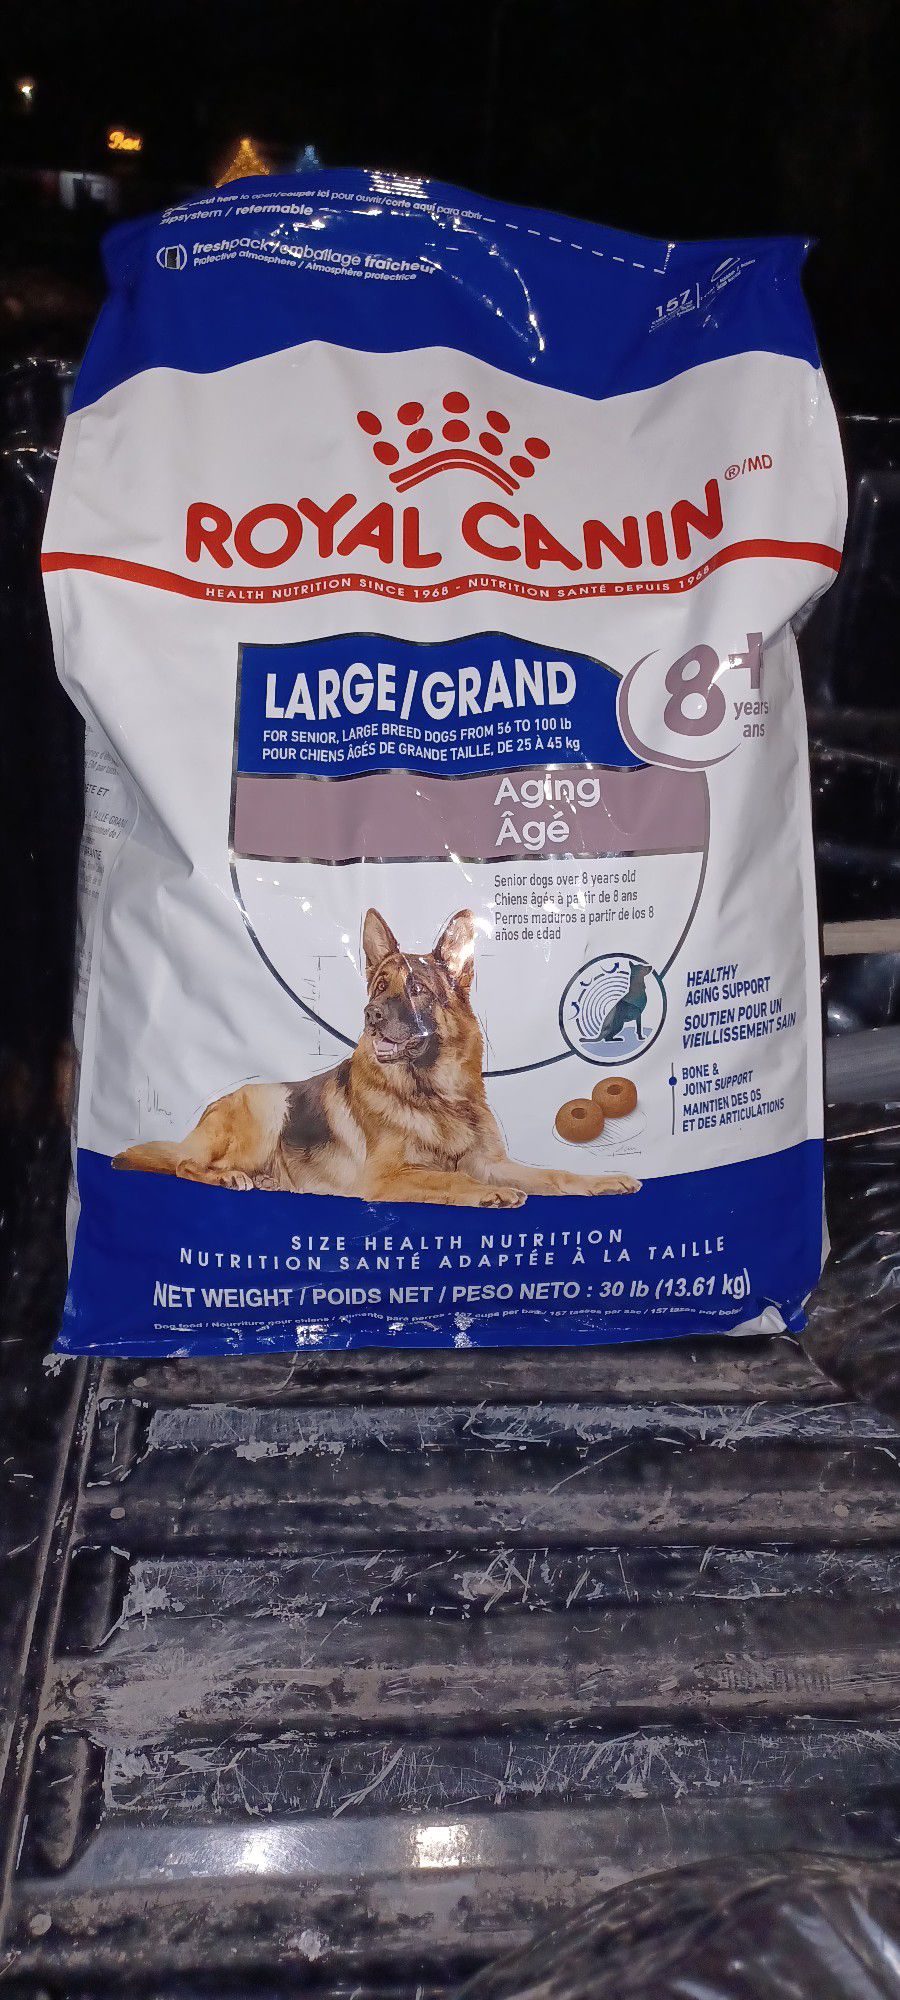 Royal Canin  Brand New $90